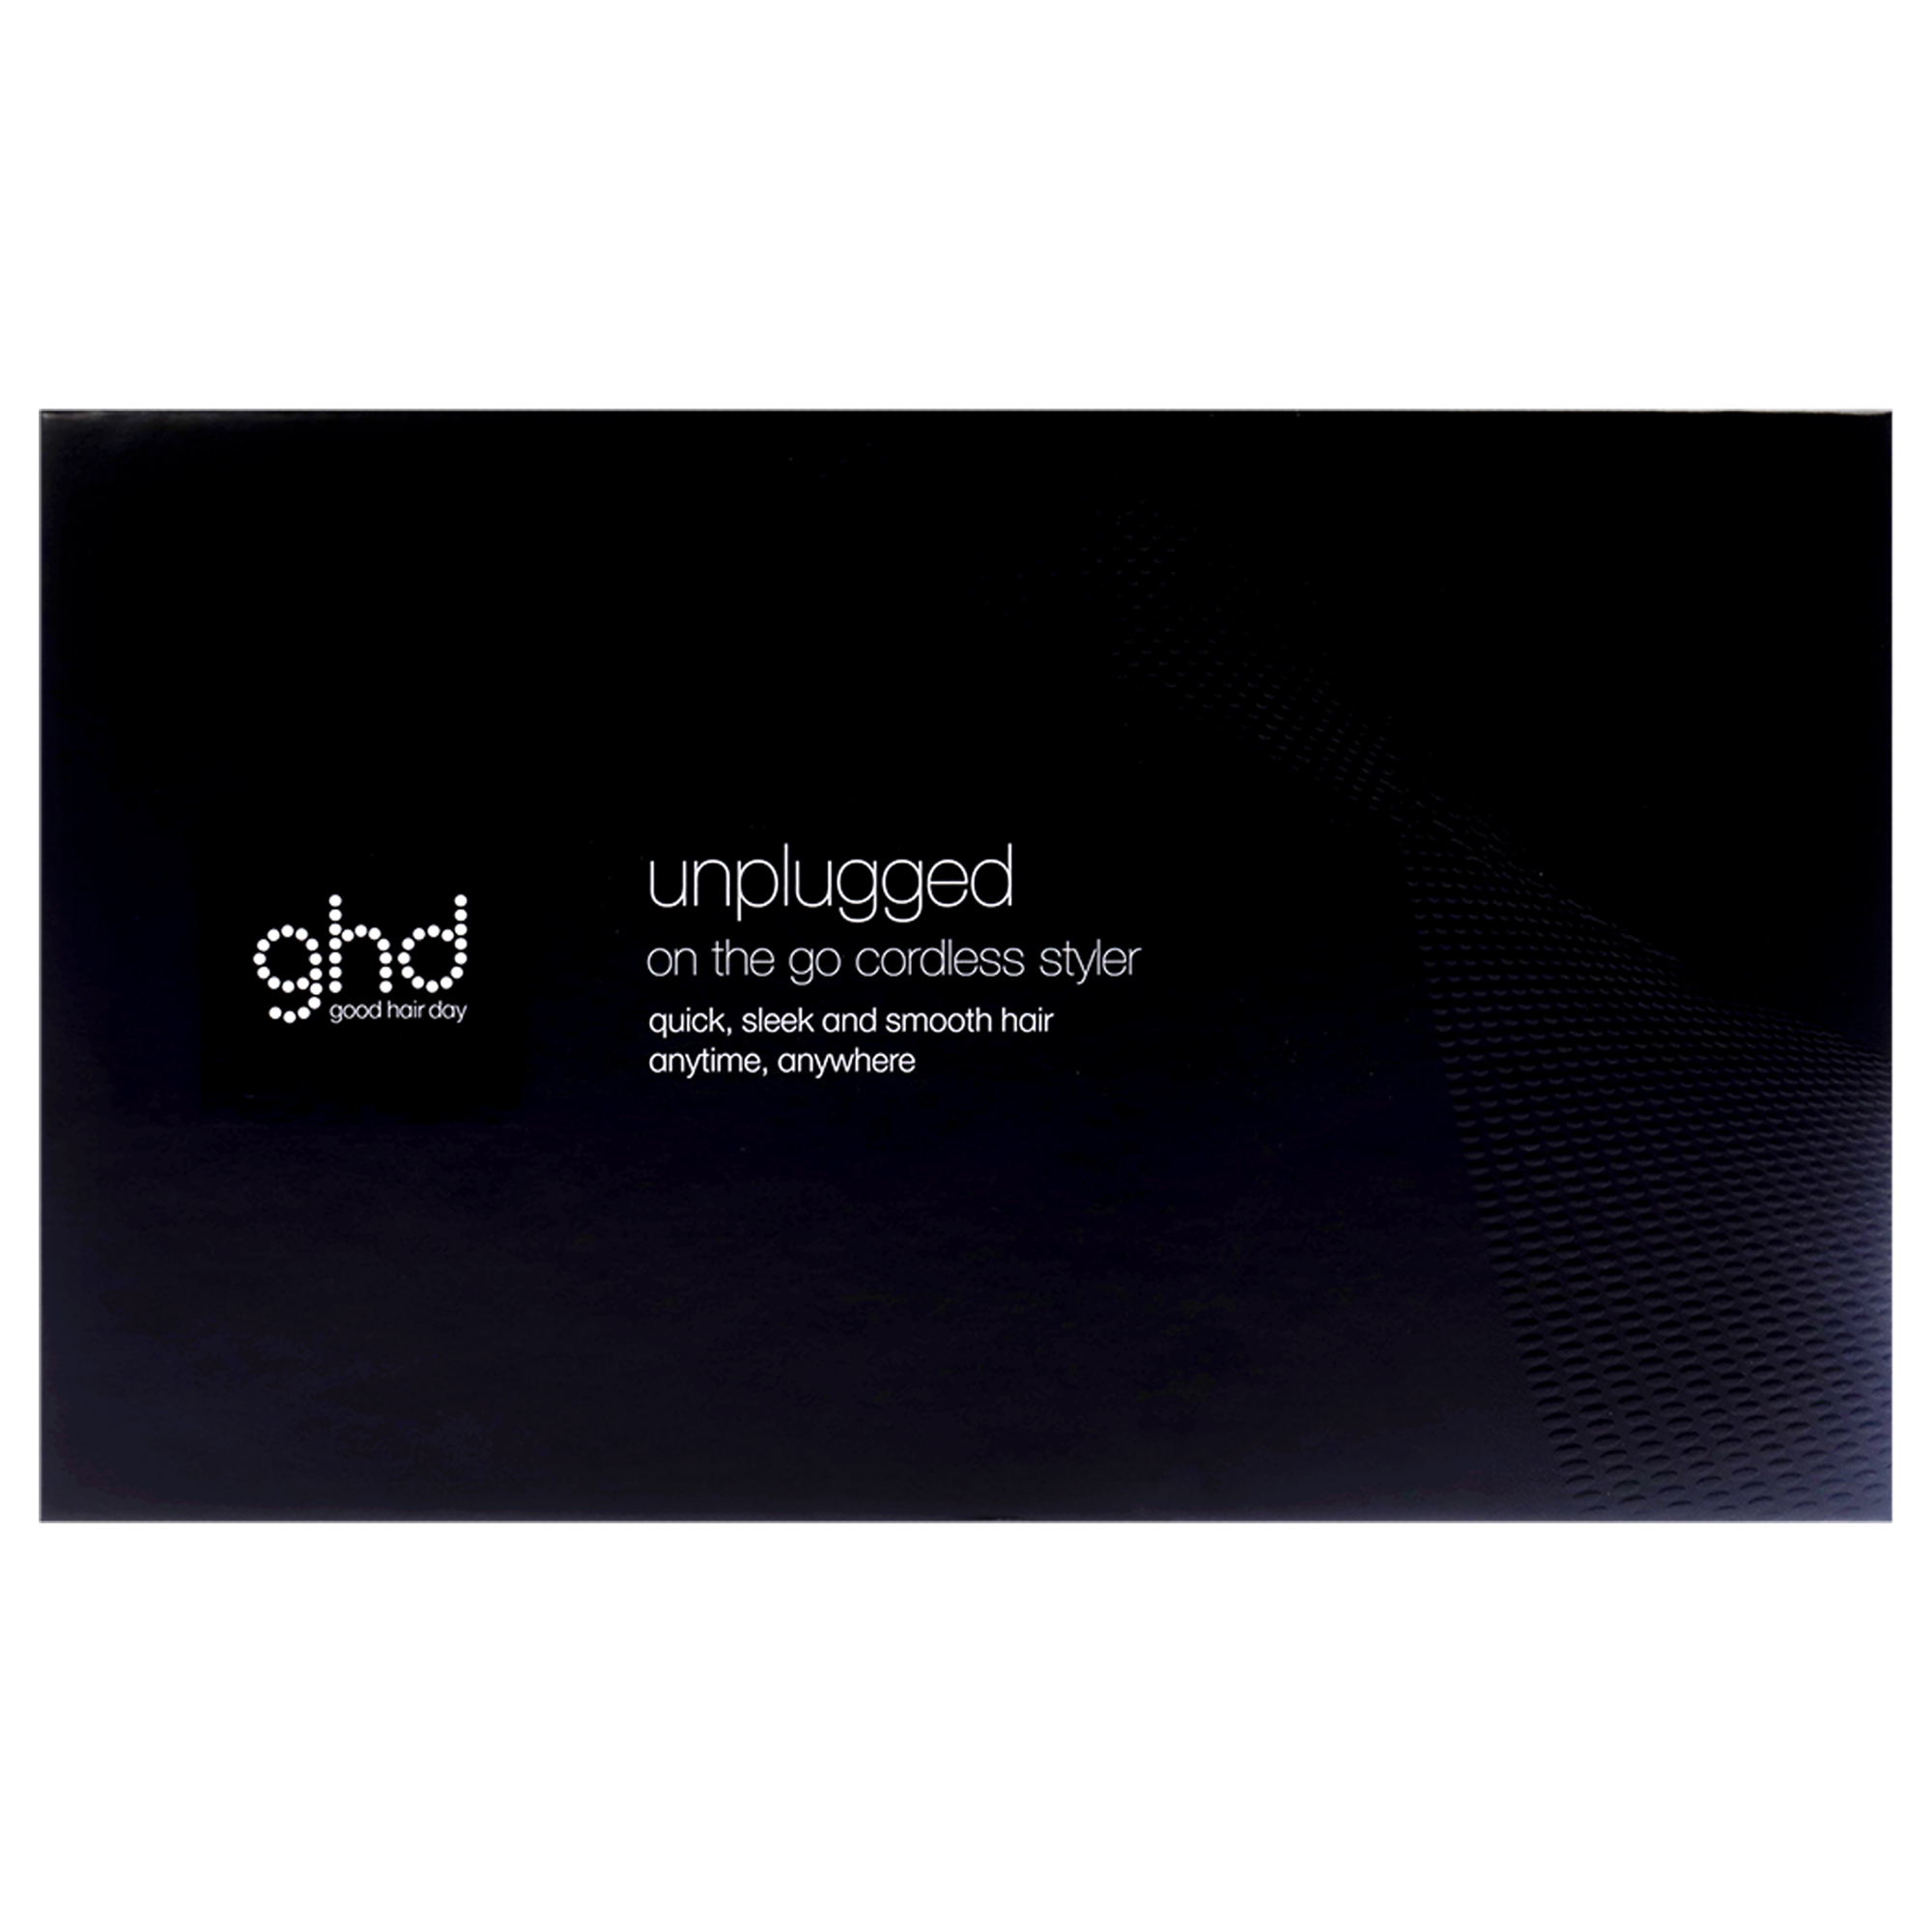 GHD GHD Unplugged Cordless Styler - Black , 1 Inch Flat Iron - image 4 of 5